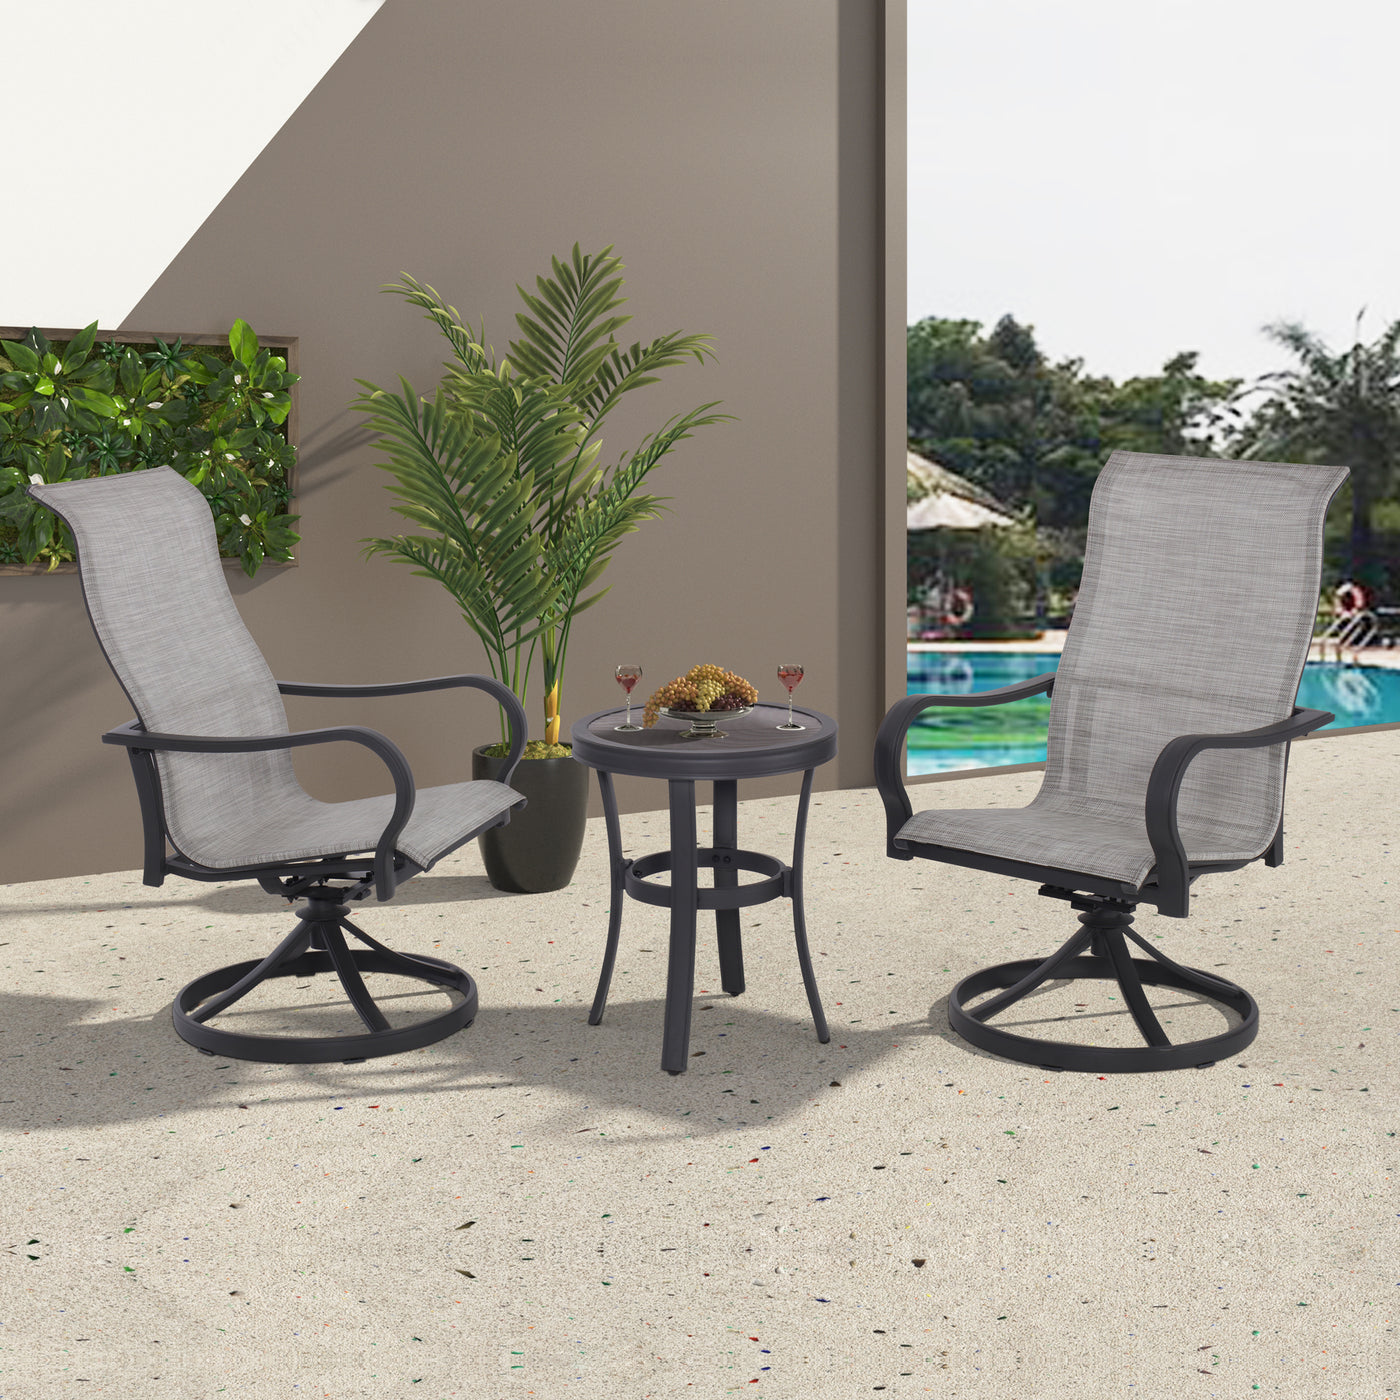 Aluminum 3-Piece Outdoor Bistro Set, Tile Top Bistro Table and 2 Swivel Chairs